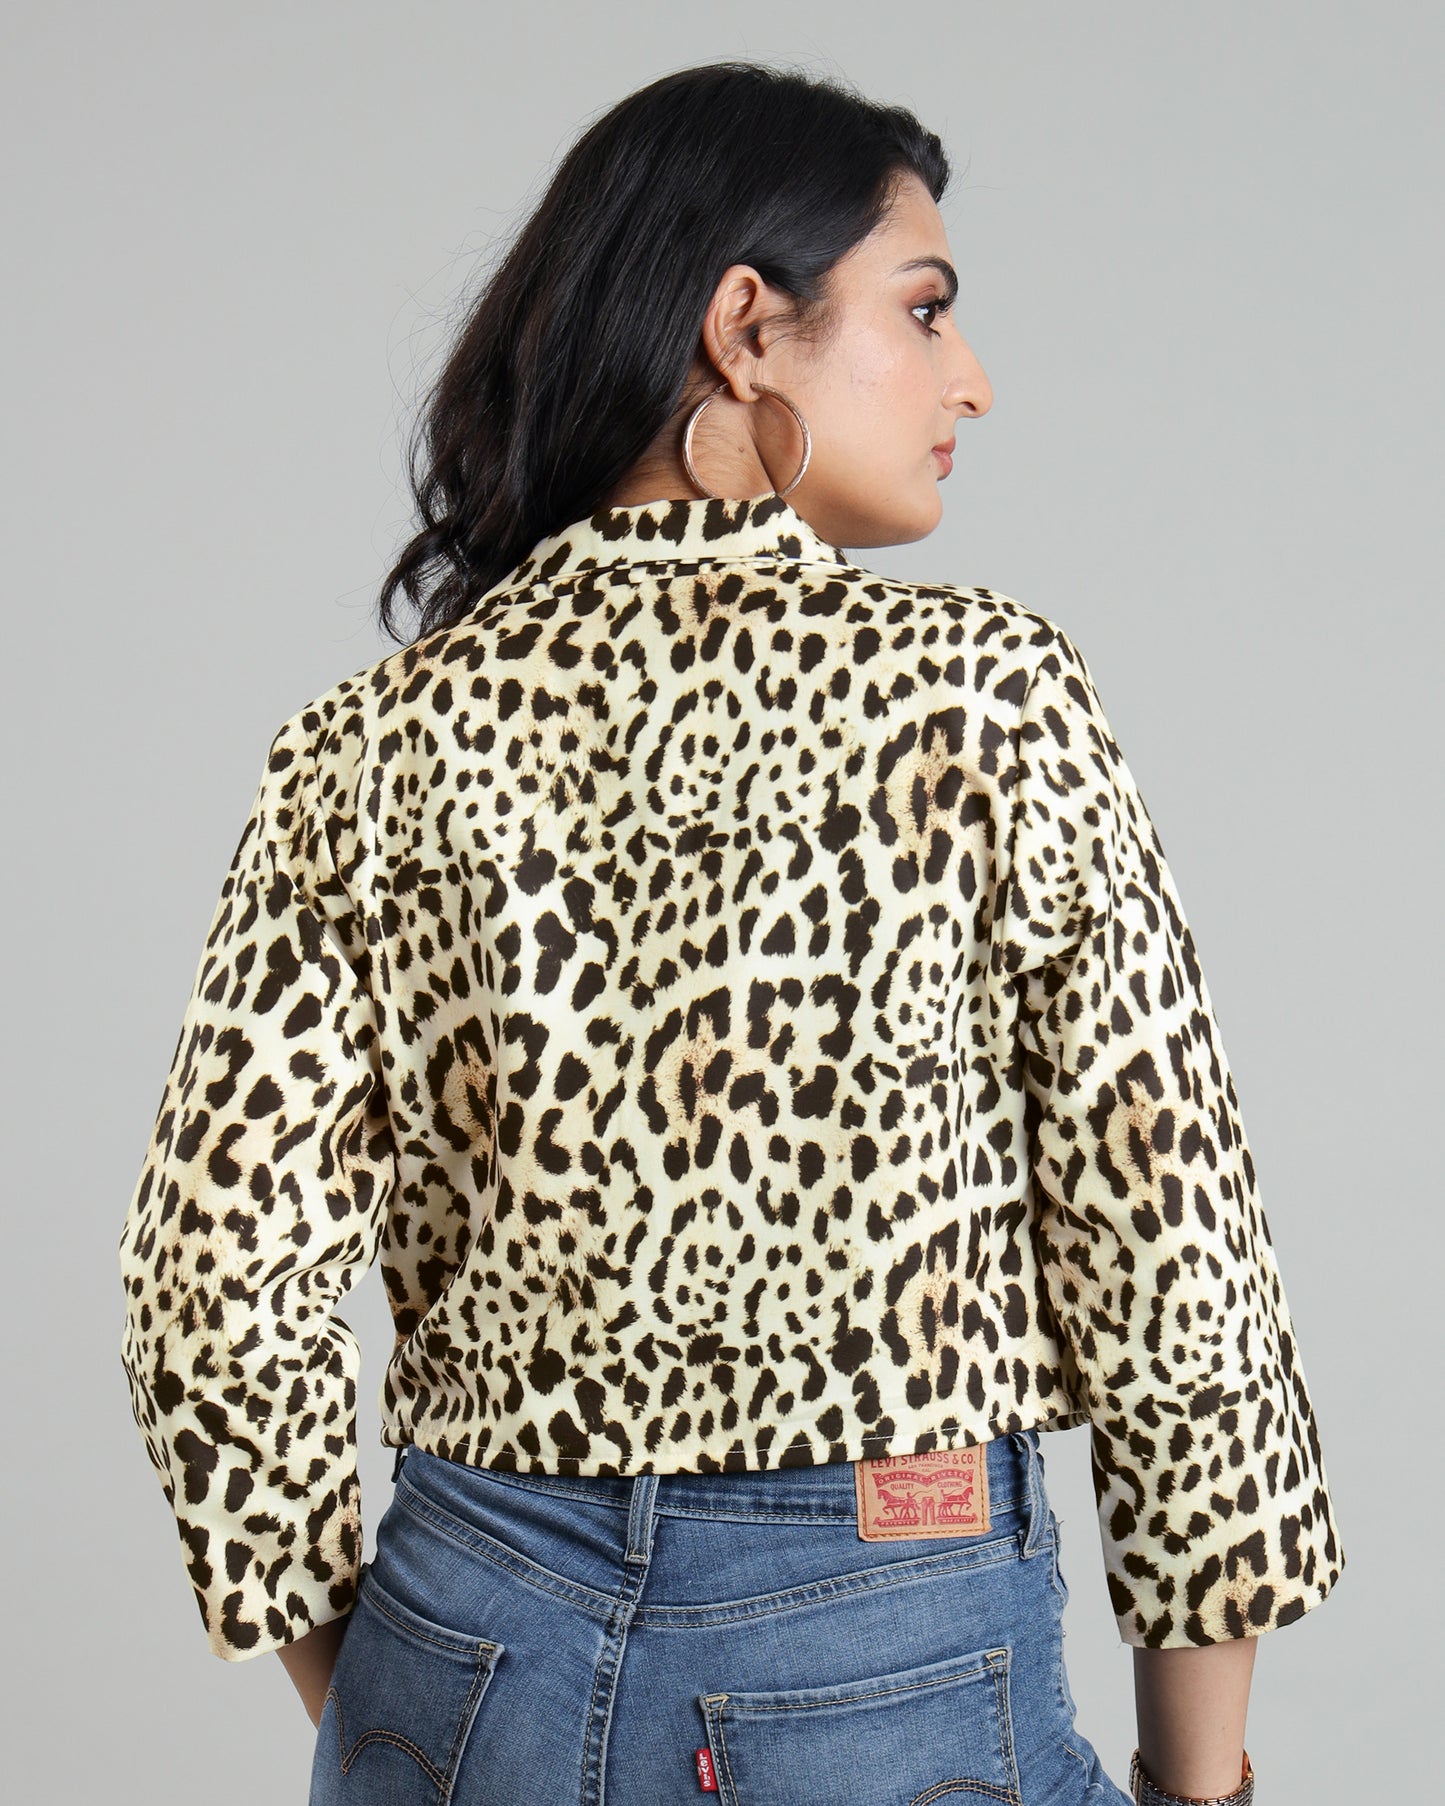 Safari Style: Natural-Inspired Jacket For Women's